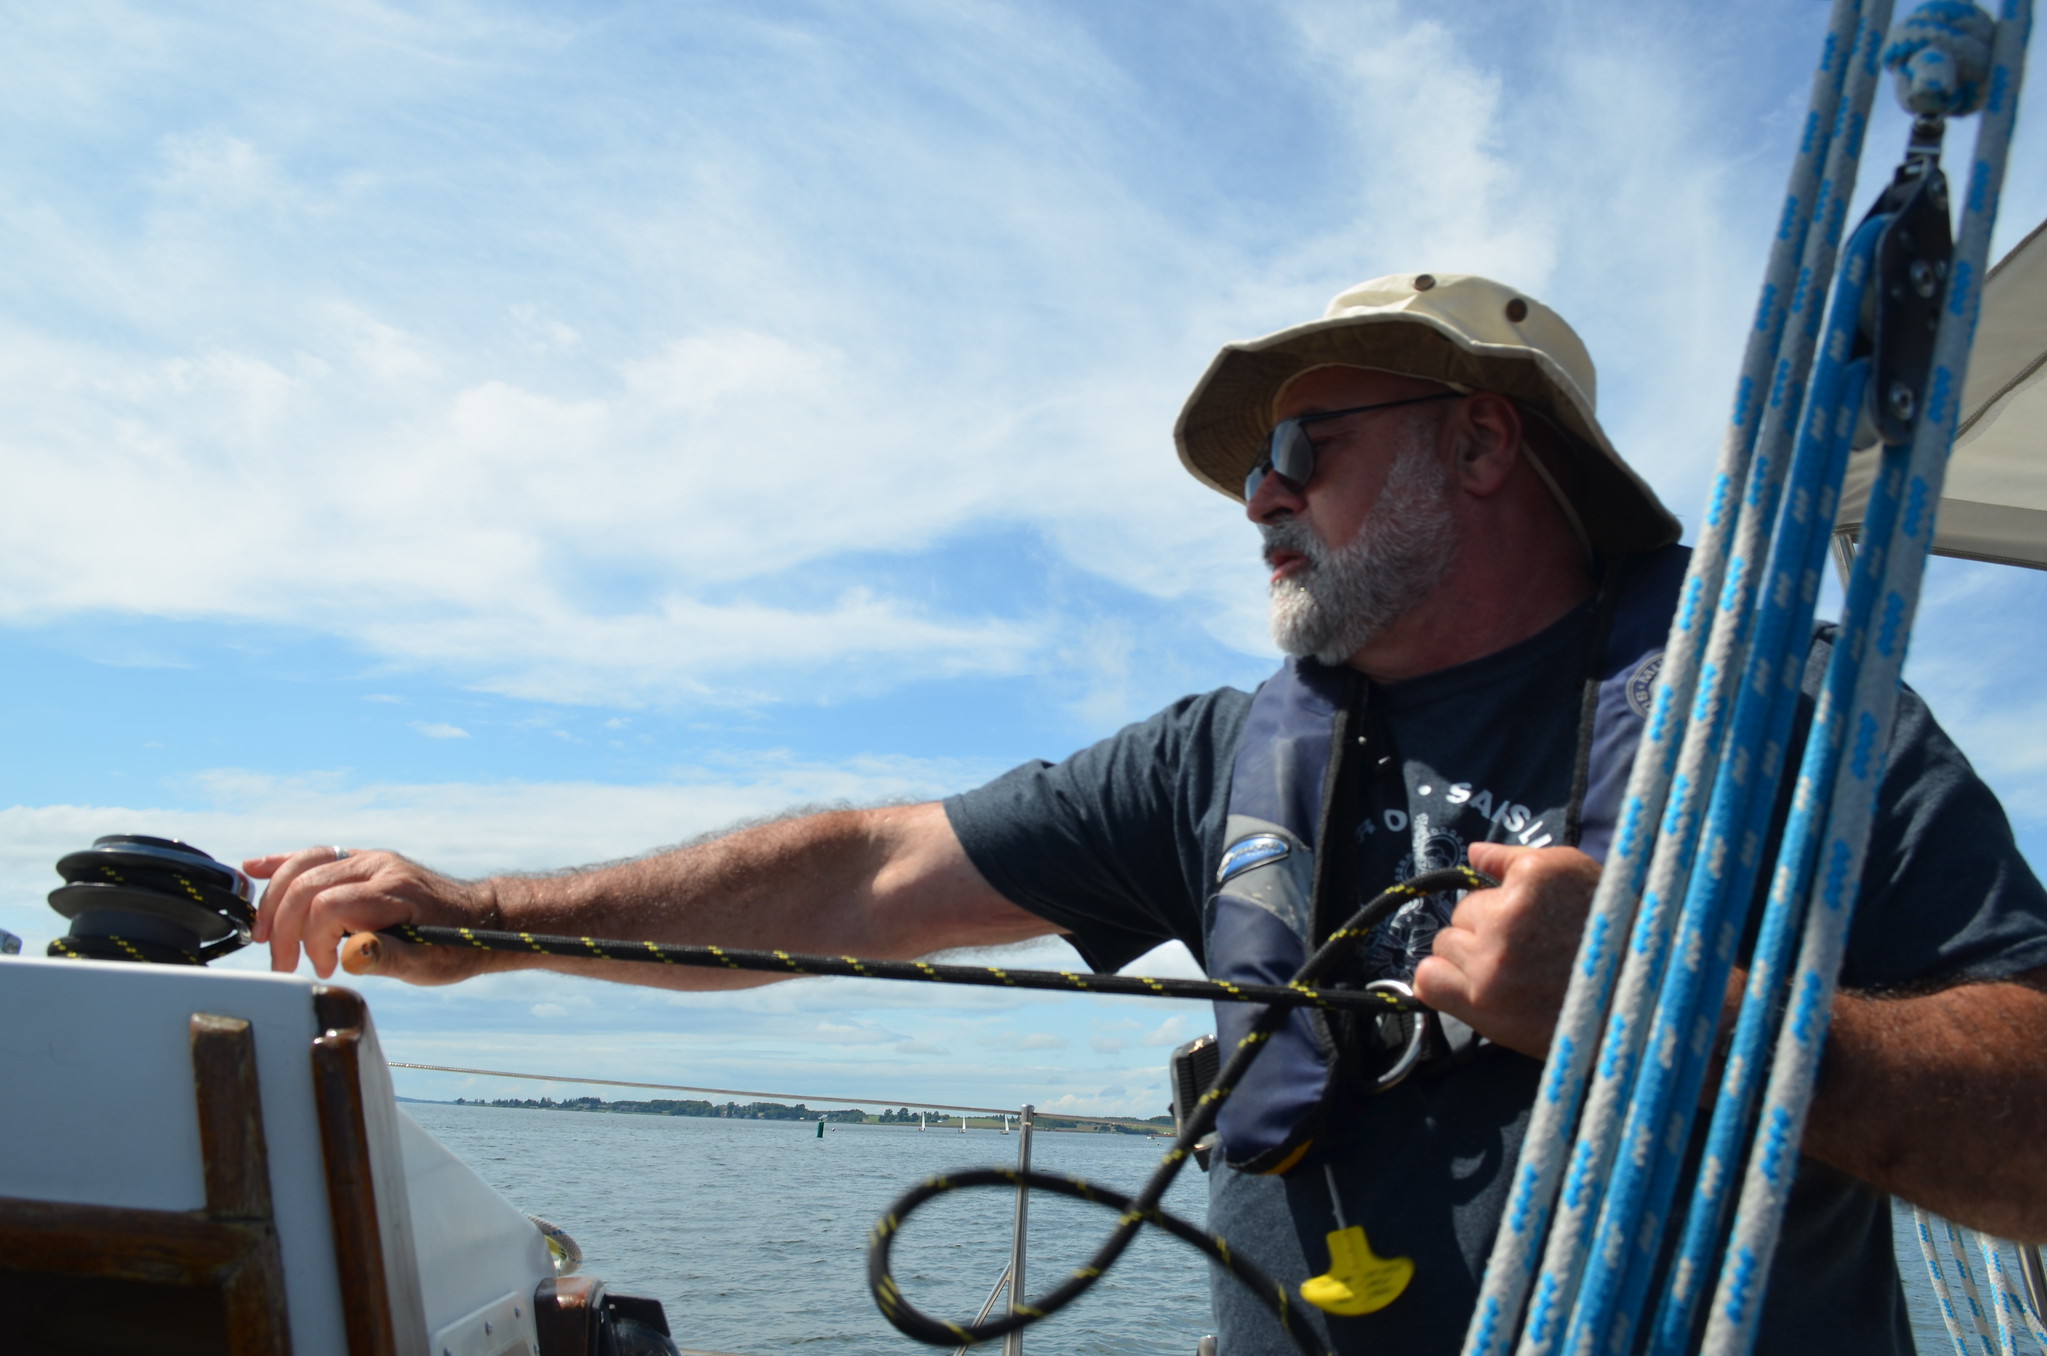 The Sound of Silence: WO Stephen Marinelli participates at a Soldier On Sailing Camp Image